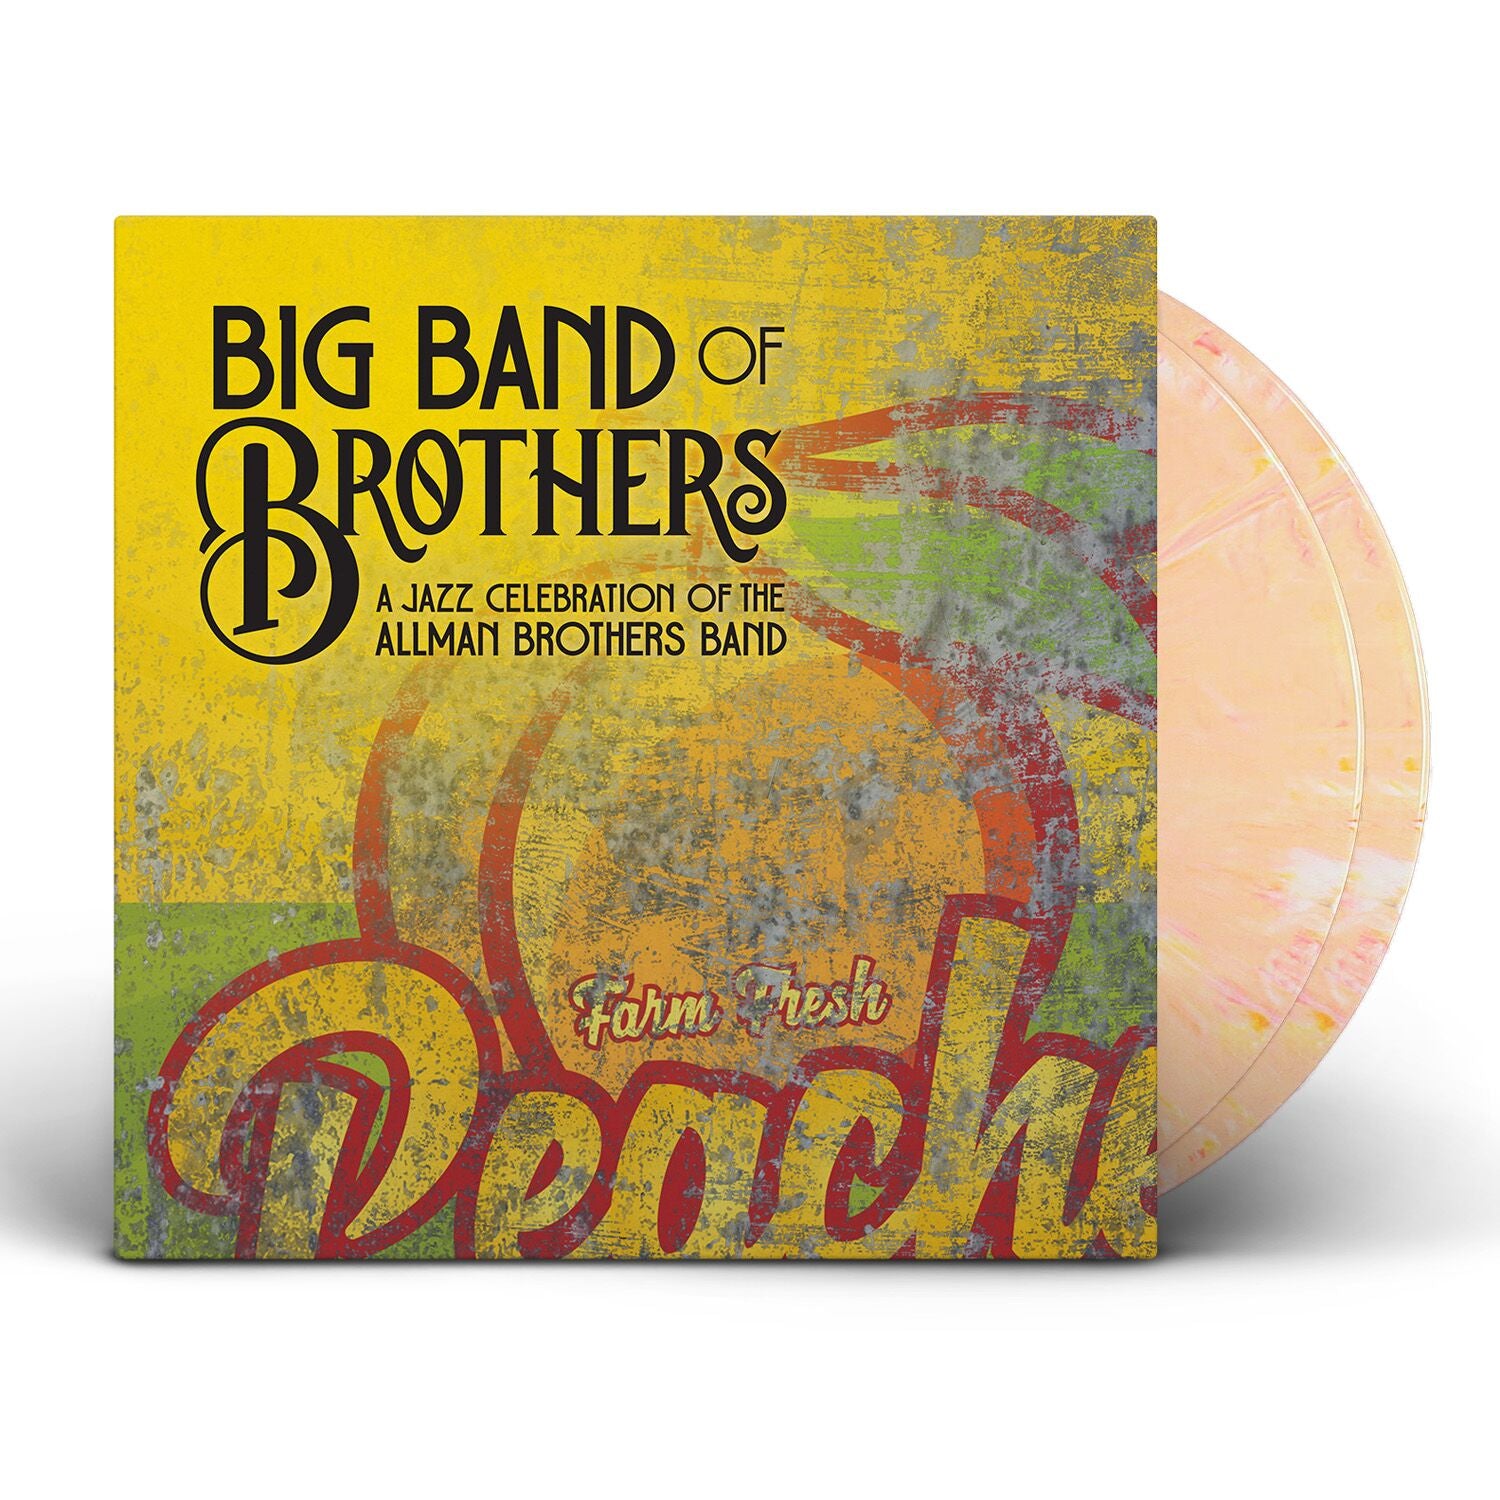 Big Band Of Brothers - A Jazz Celebration Of The Allman Brothers Band [Vinyl]